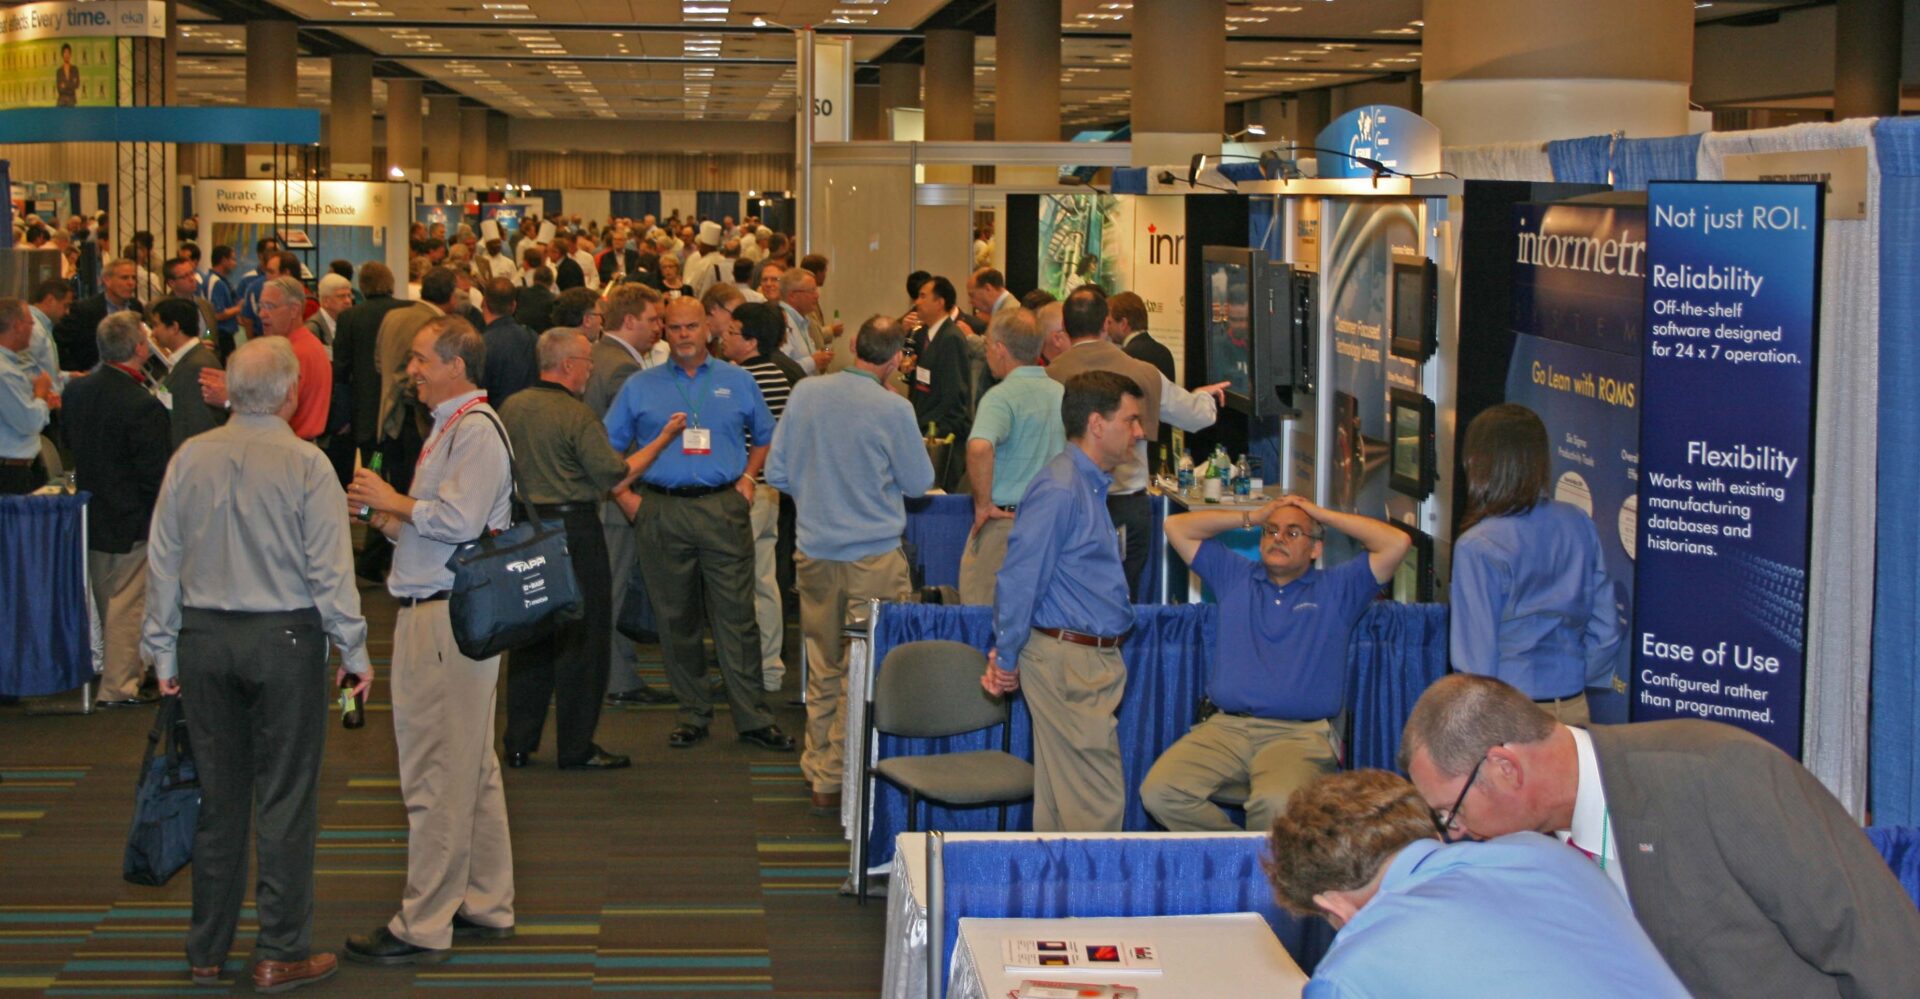 A crowd of men networking at PaperCon 2010